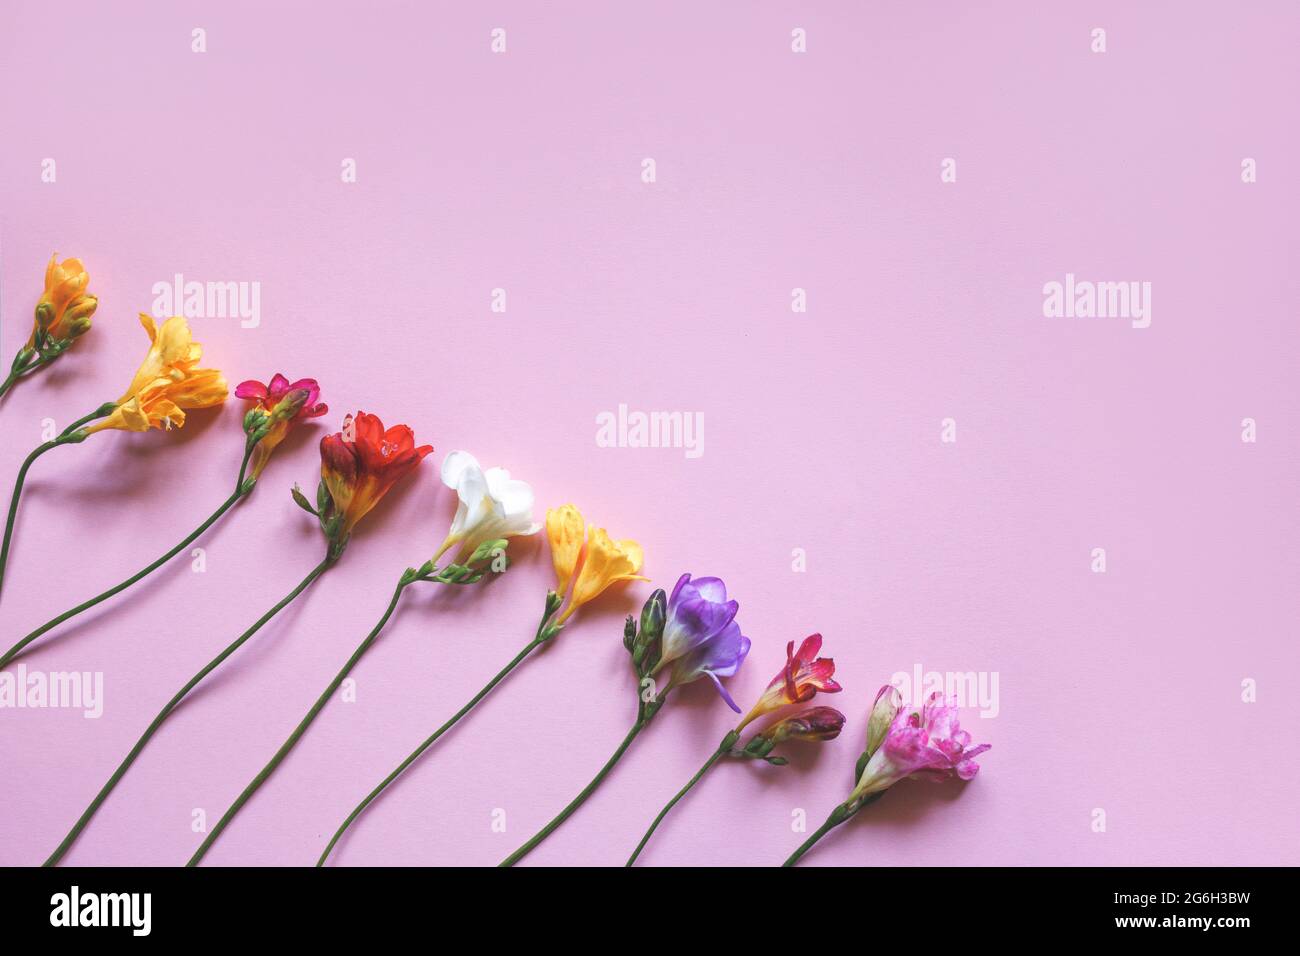 Multicolored freesia flowers on a pink background. Festive beautiful background. Flat lay, flower pattern Stock Photo